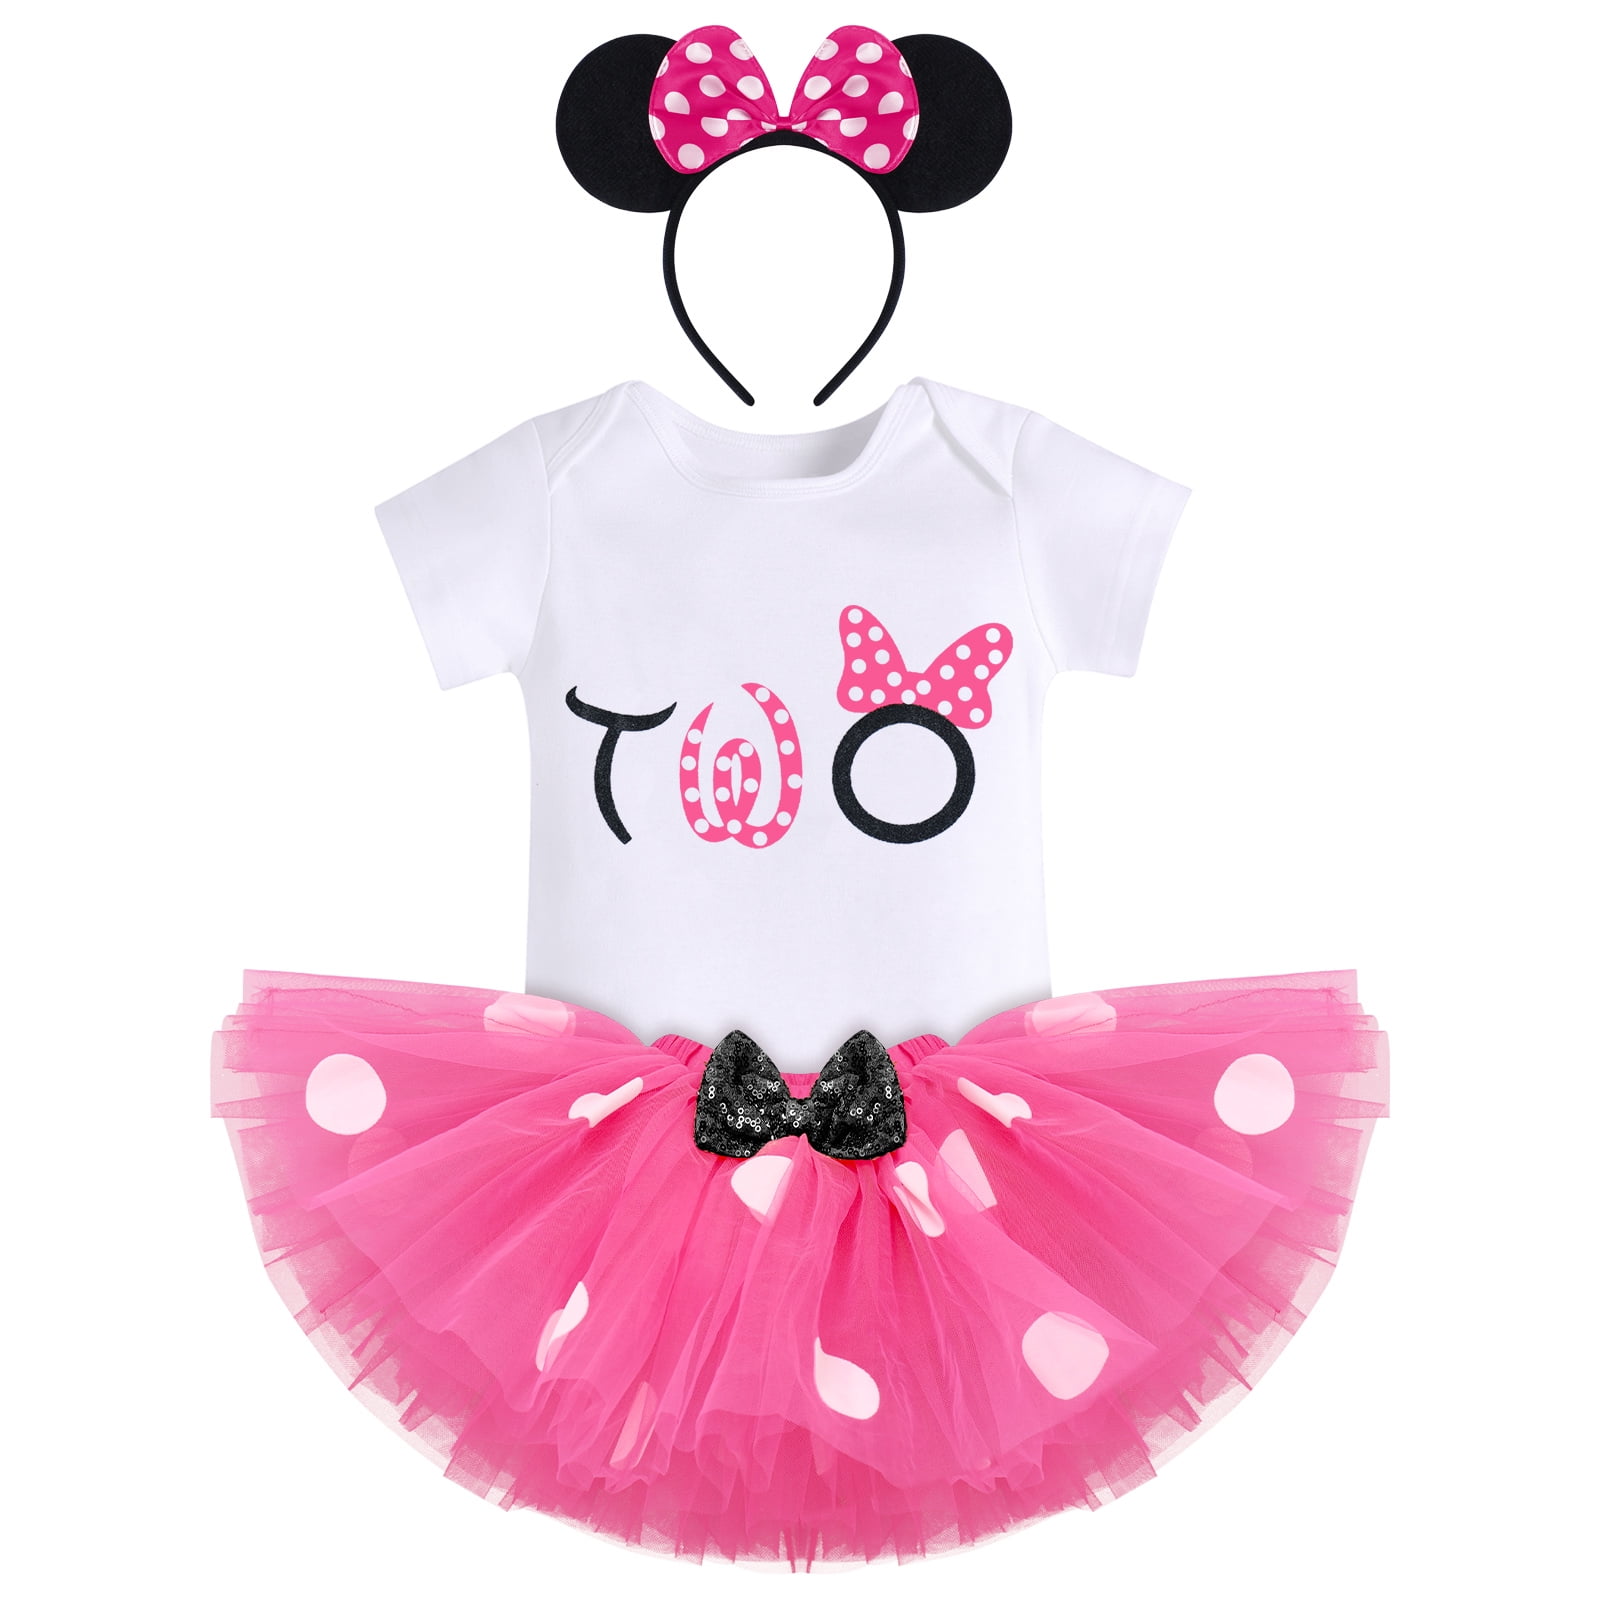 2nd Birthday Girl Outfit Baby Girls Polka Dot Romper Dominican Republic